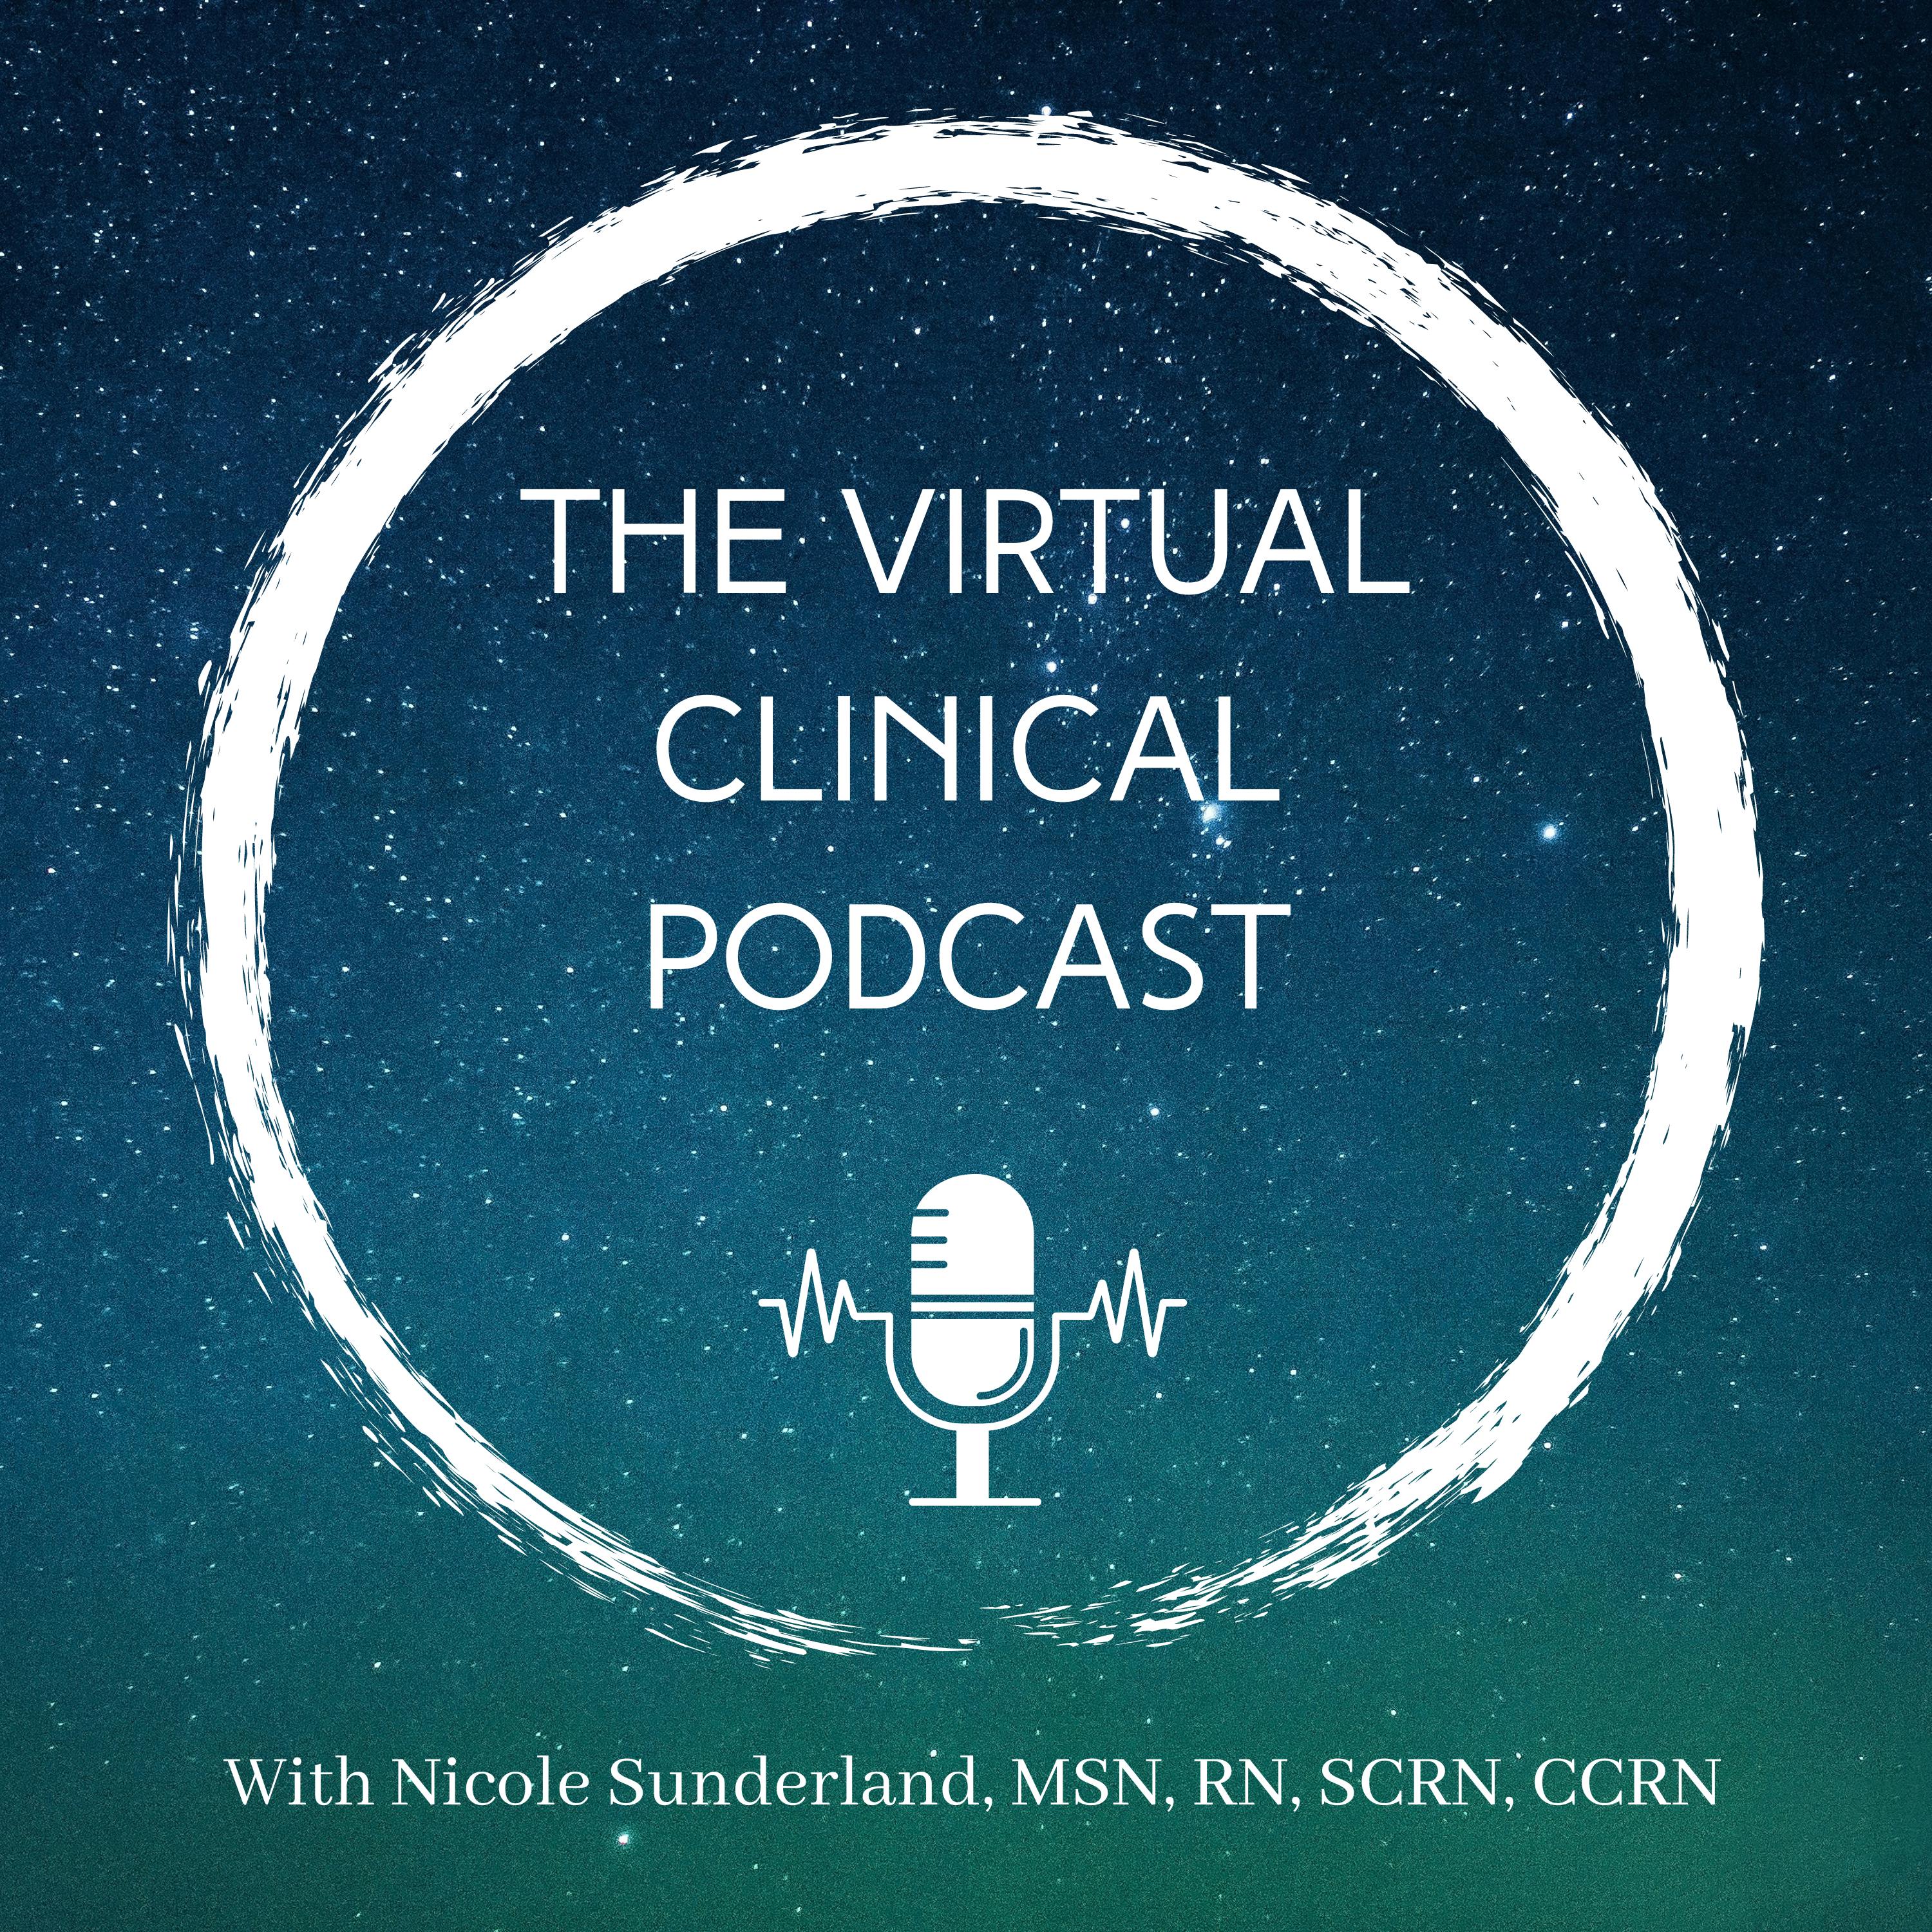 S2 Ep3 Population Health and Implementation Science with Lori Merkel, PhD, MSPH, RN, CPHQ